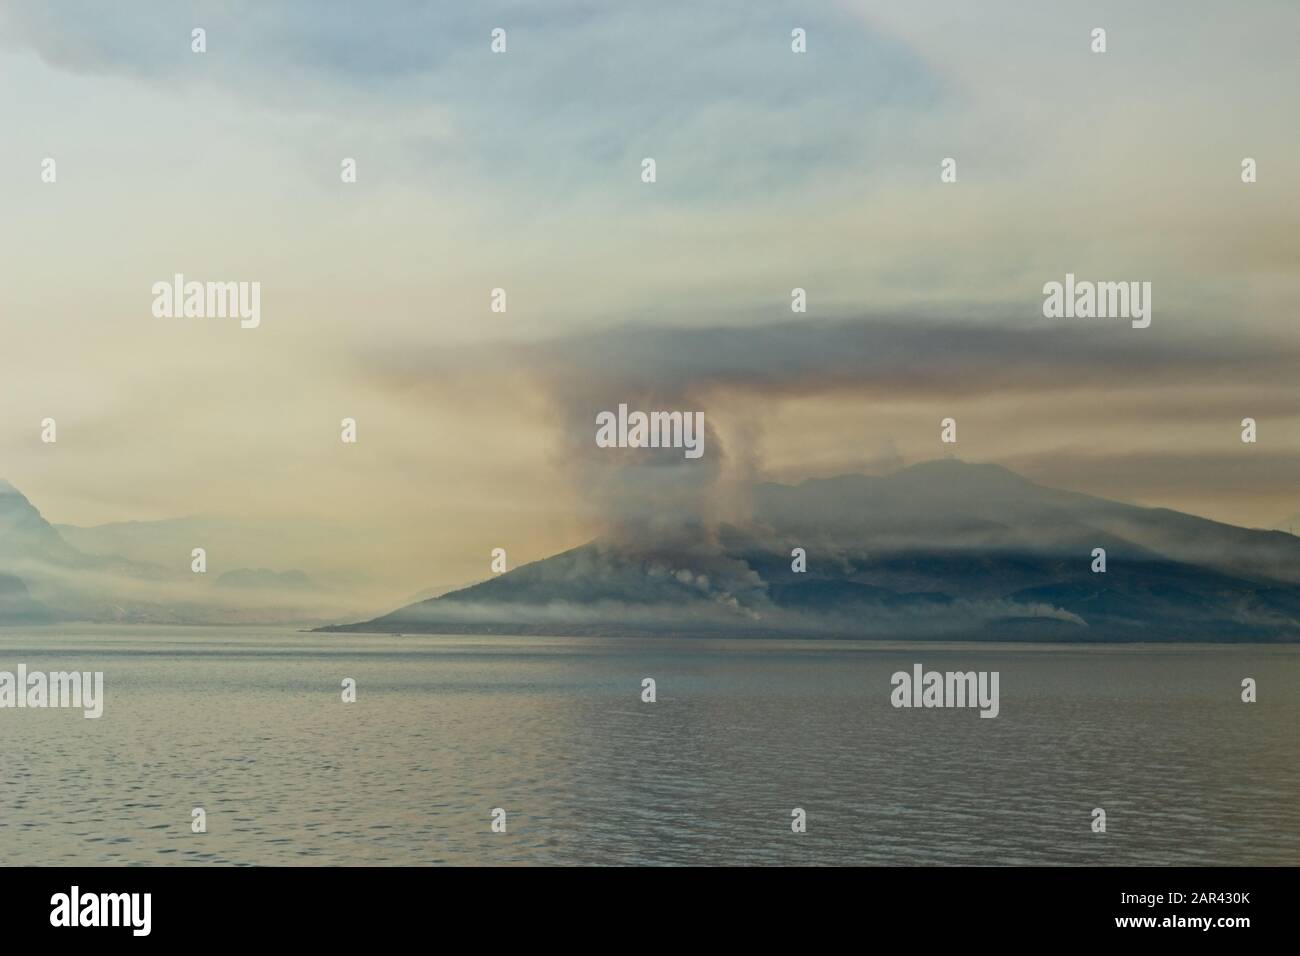 Scenery of smoke coming out of the mountain at the ocean Stock Photo